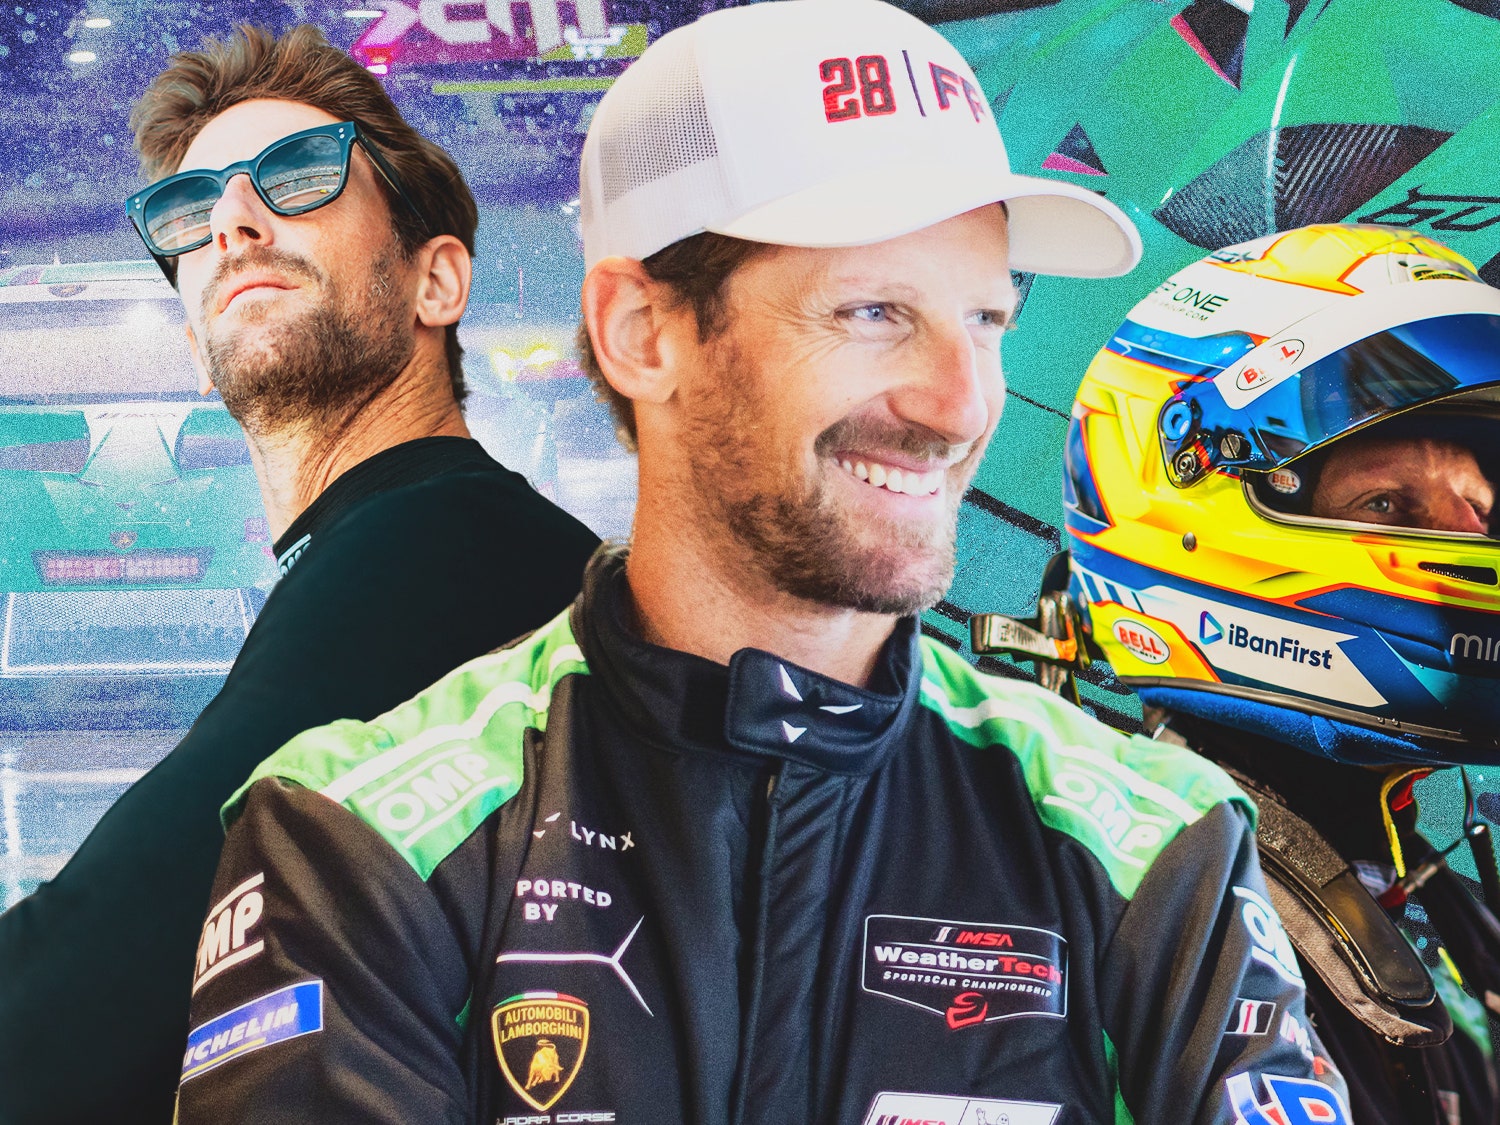 Romain Grosjean on His New Endurance Racing Gig, His Last Days with Haas, and Turning His Frightening F1 Crash Into Something Positive